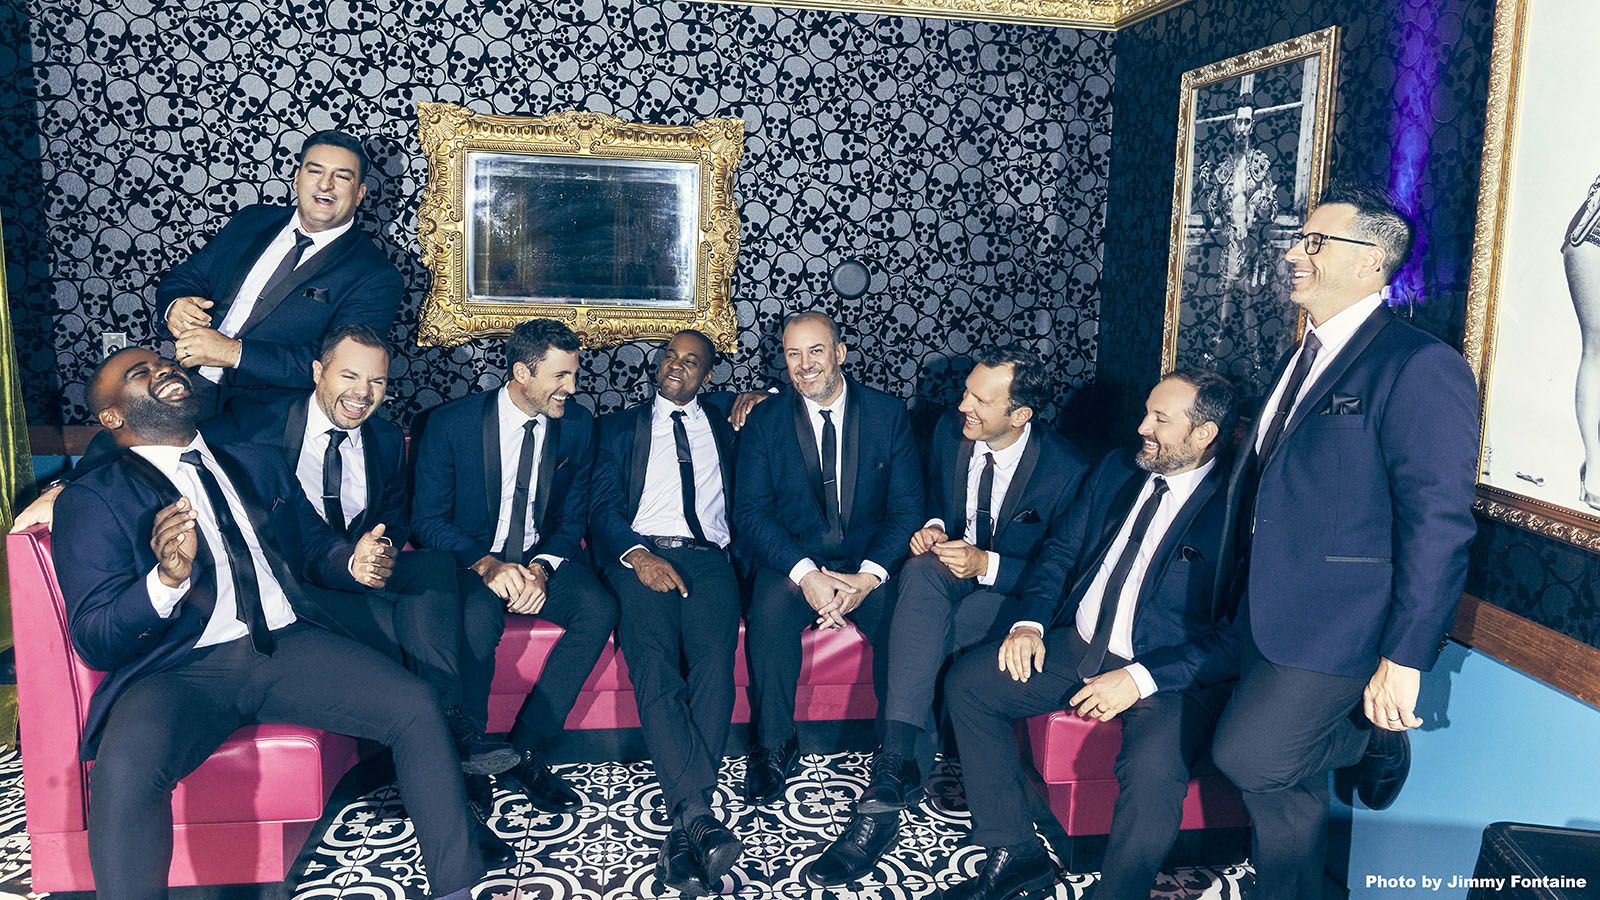 The popular a cappella group Straight No Chaser return to Embassy Theatre on Wednesday, Dec. 20, as part of their Sleighin’ It Tour.